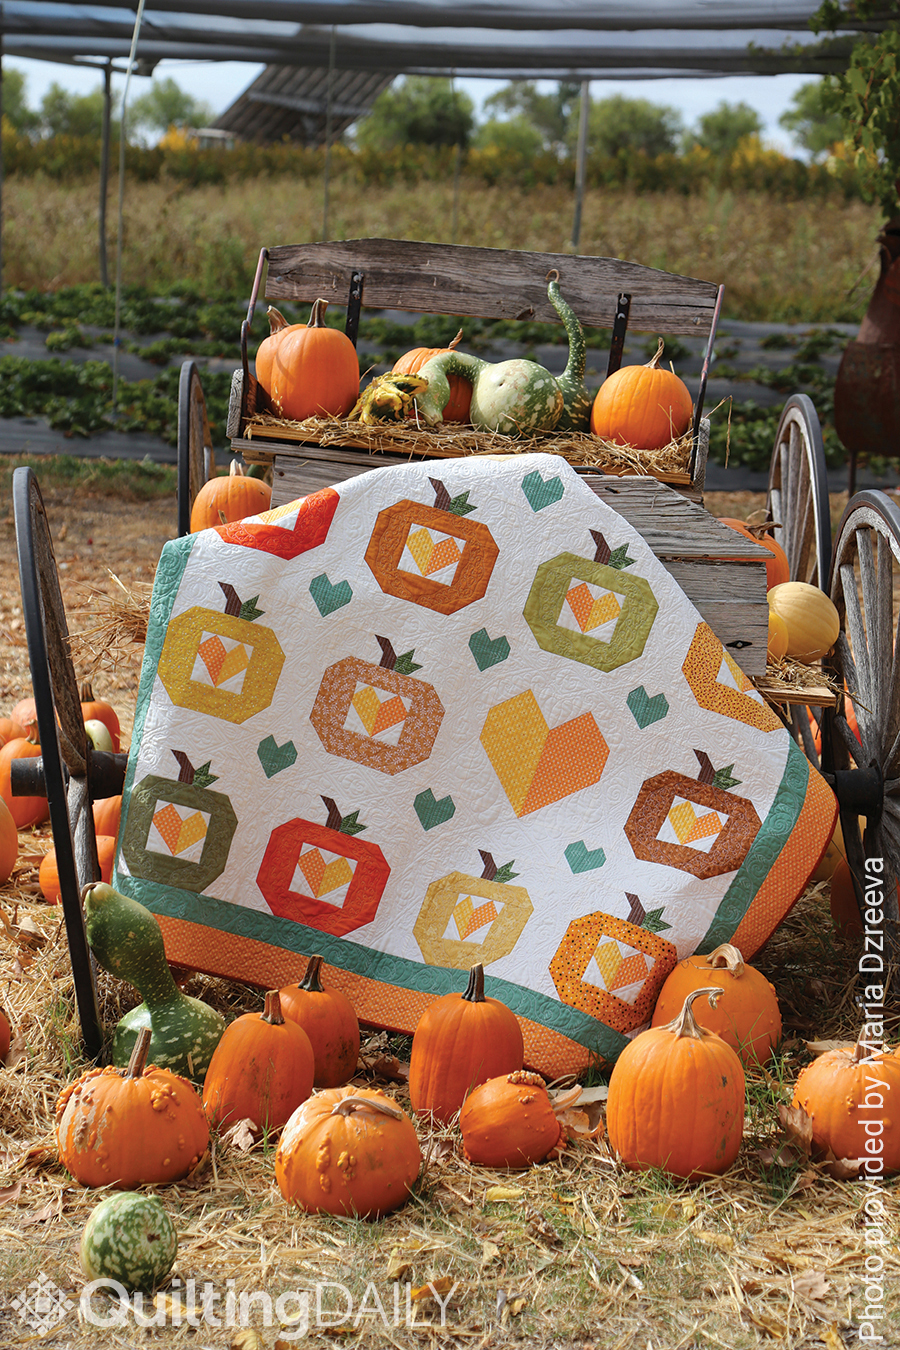 Free quilt pattern: Harvest Time - full view of the quilt surrounded by pumpkins